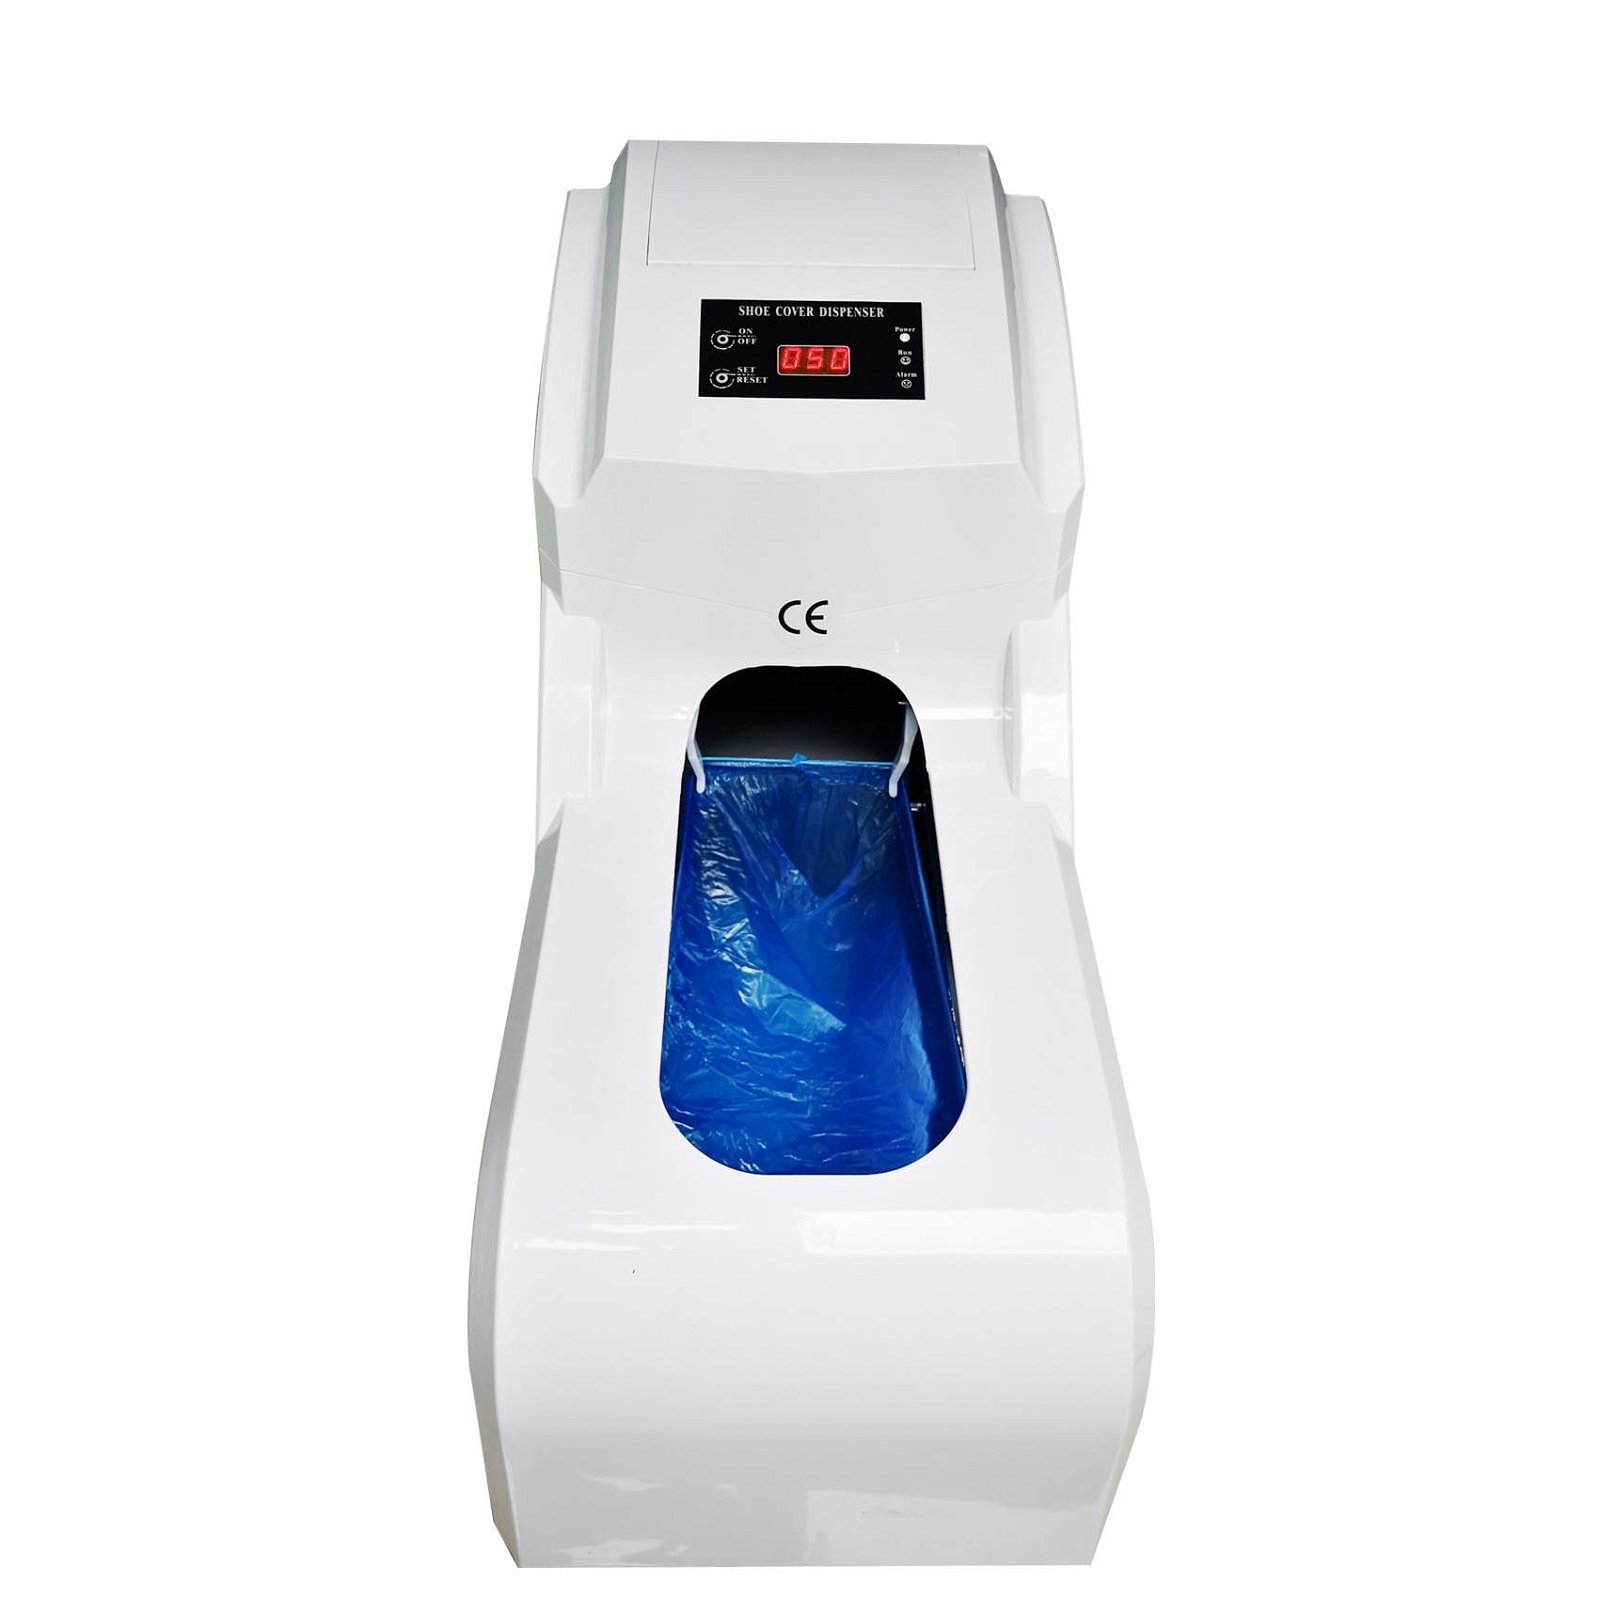 E-SD22 Clean Room Home Business Shoe Covers Dispenser 1